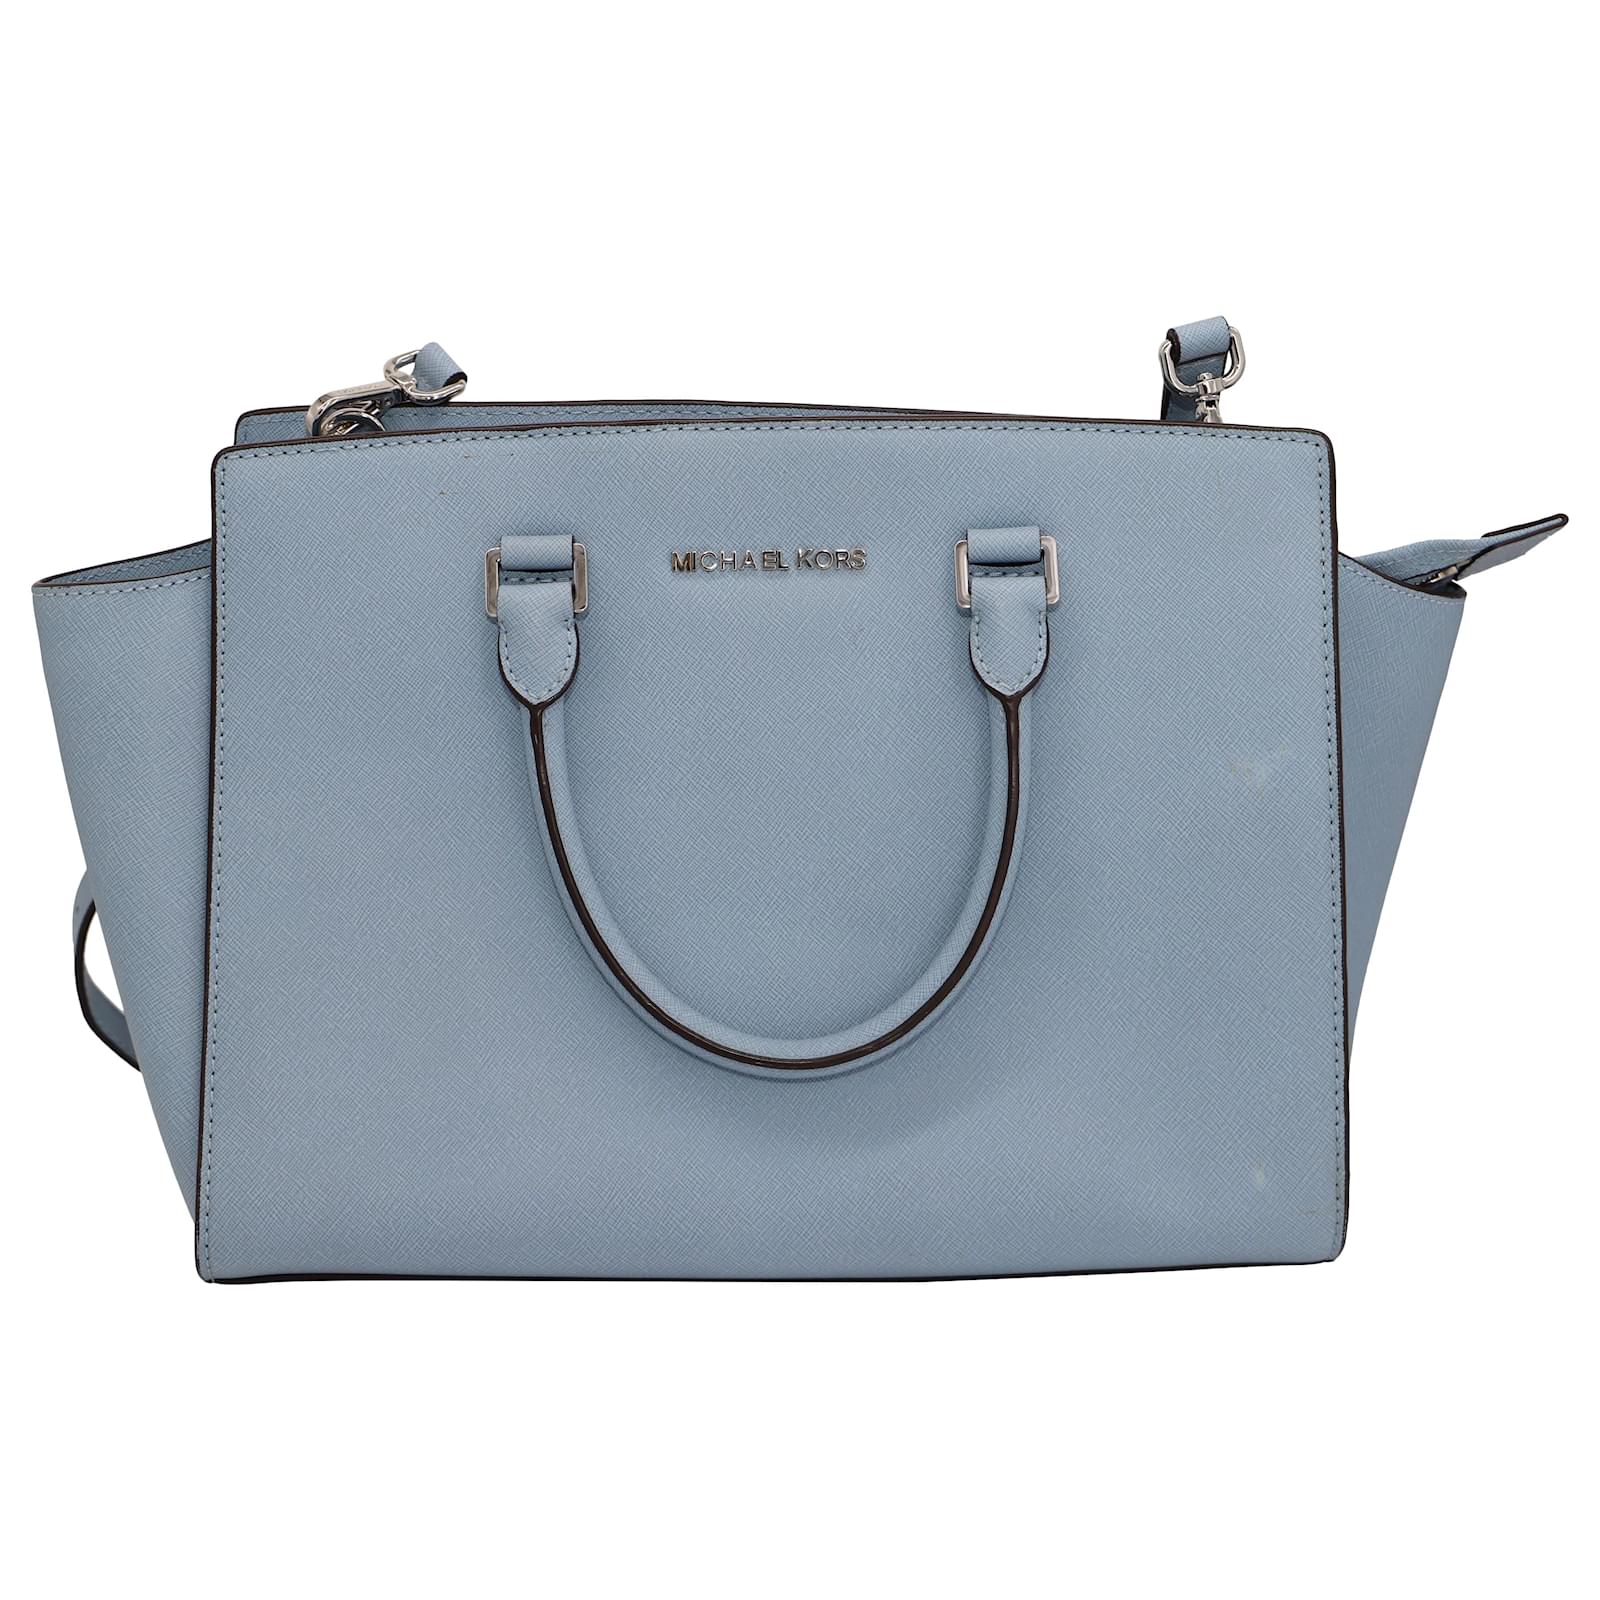 Michael Kors 2Way Shoulder Bag Tote Leather With Pouch Light Blue 1108  Ladies | eBay